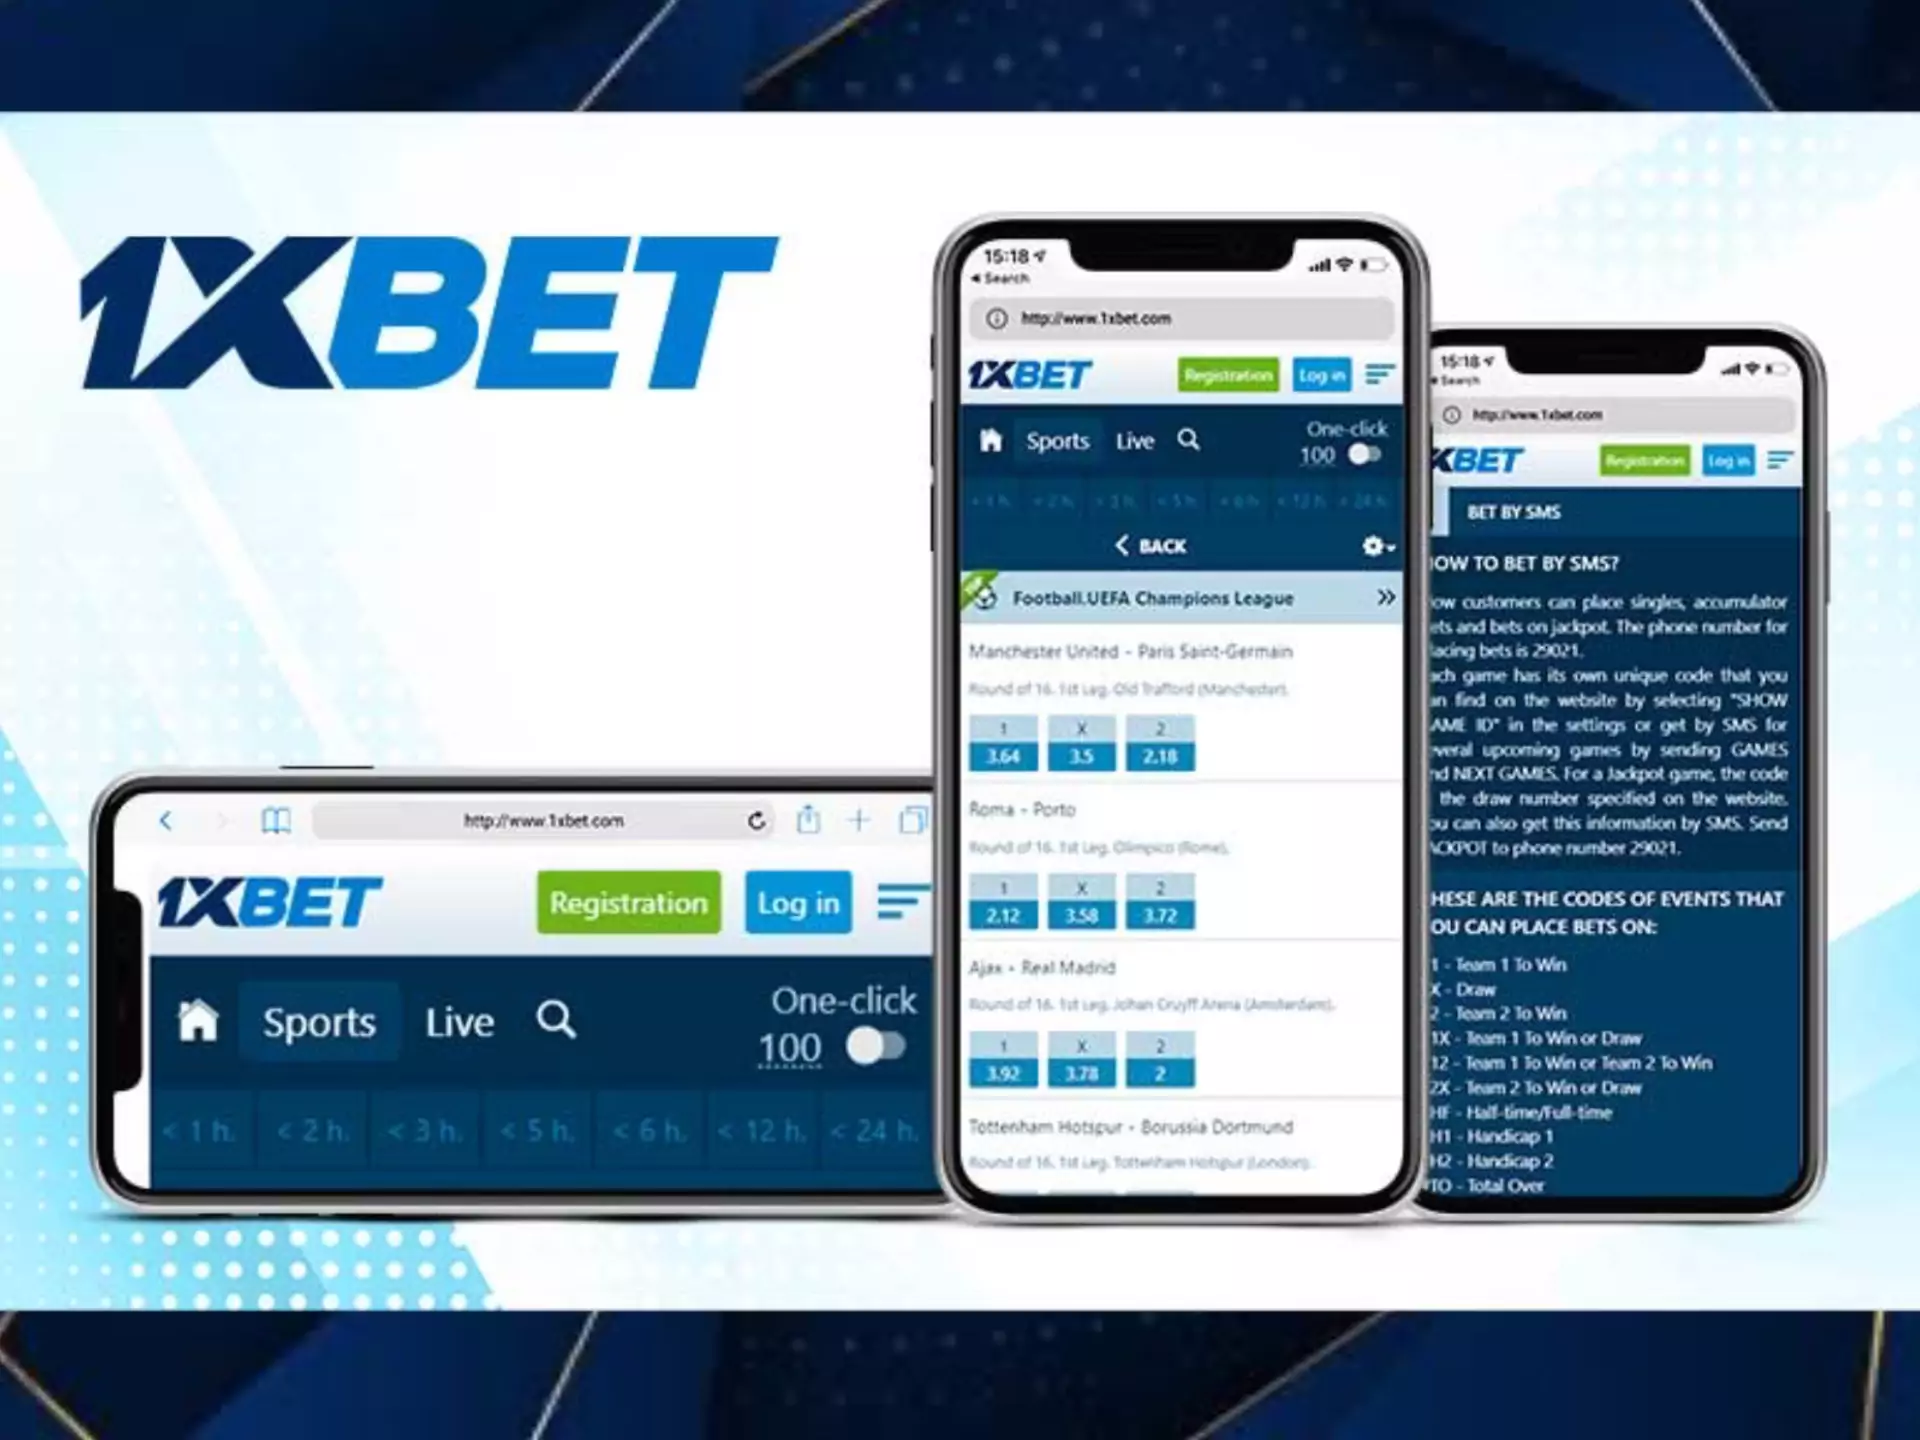 You can opern a web version of 1xbet on your mobile phone and bet via it.